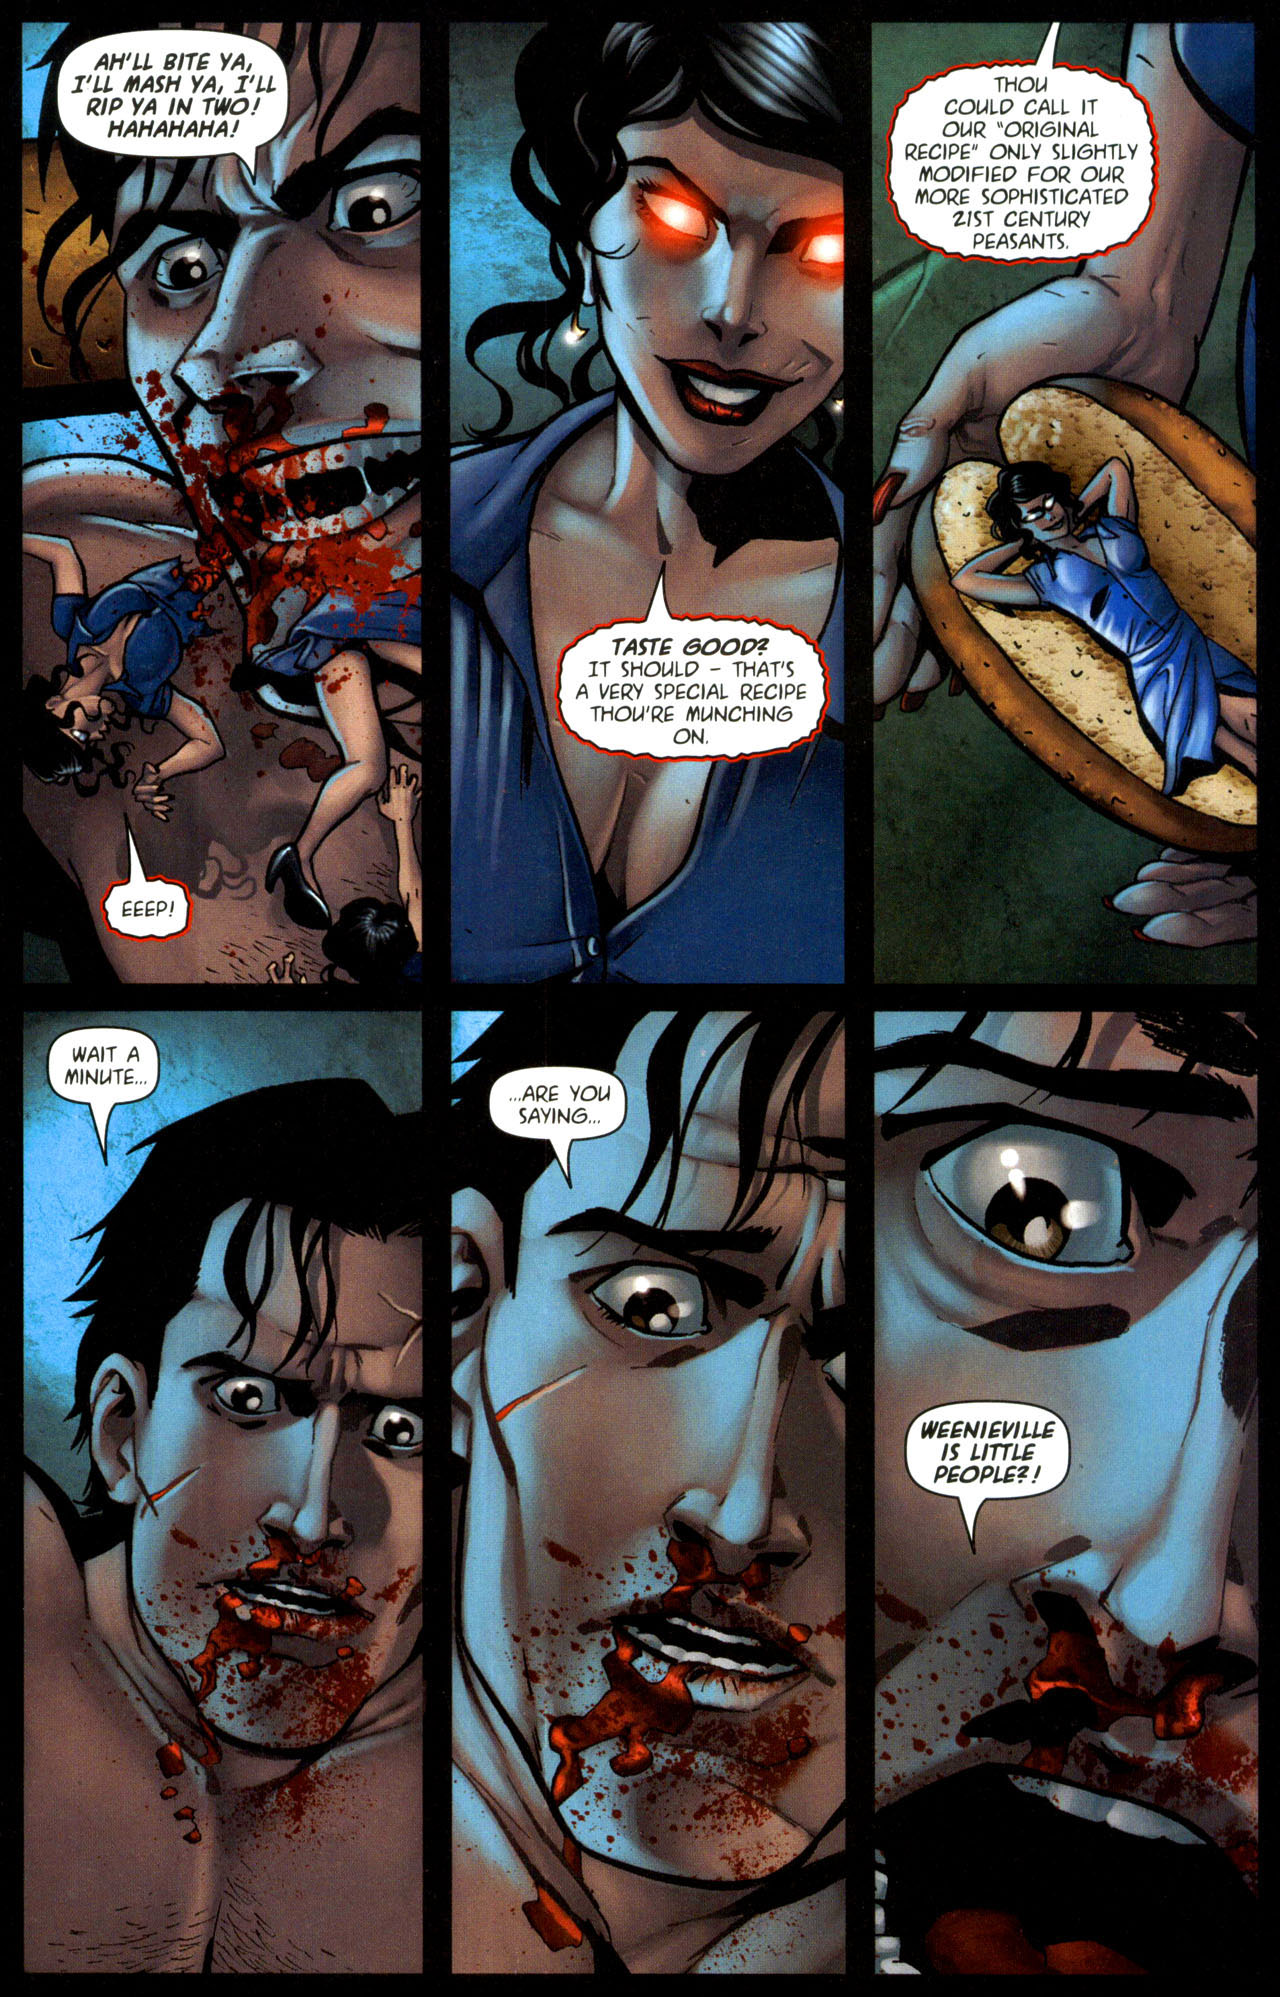 Marvel Zombies, Army of Darkness 13